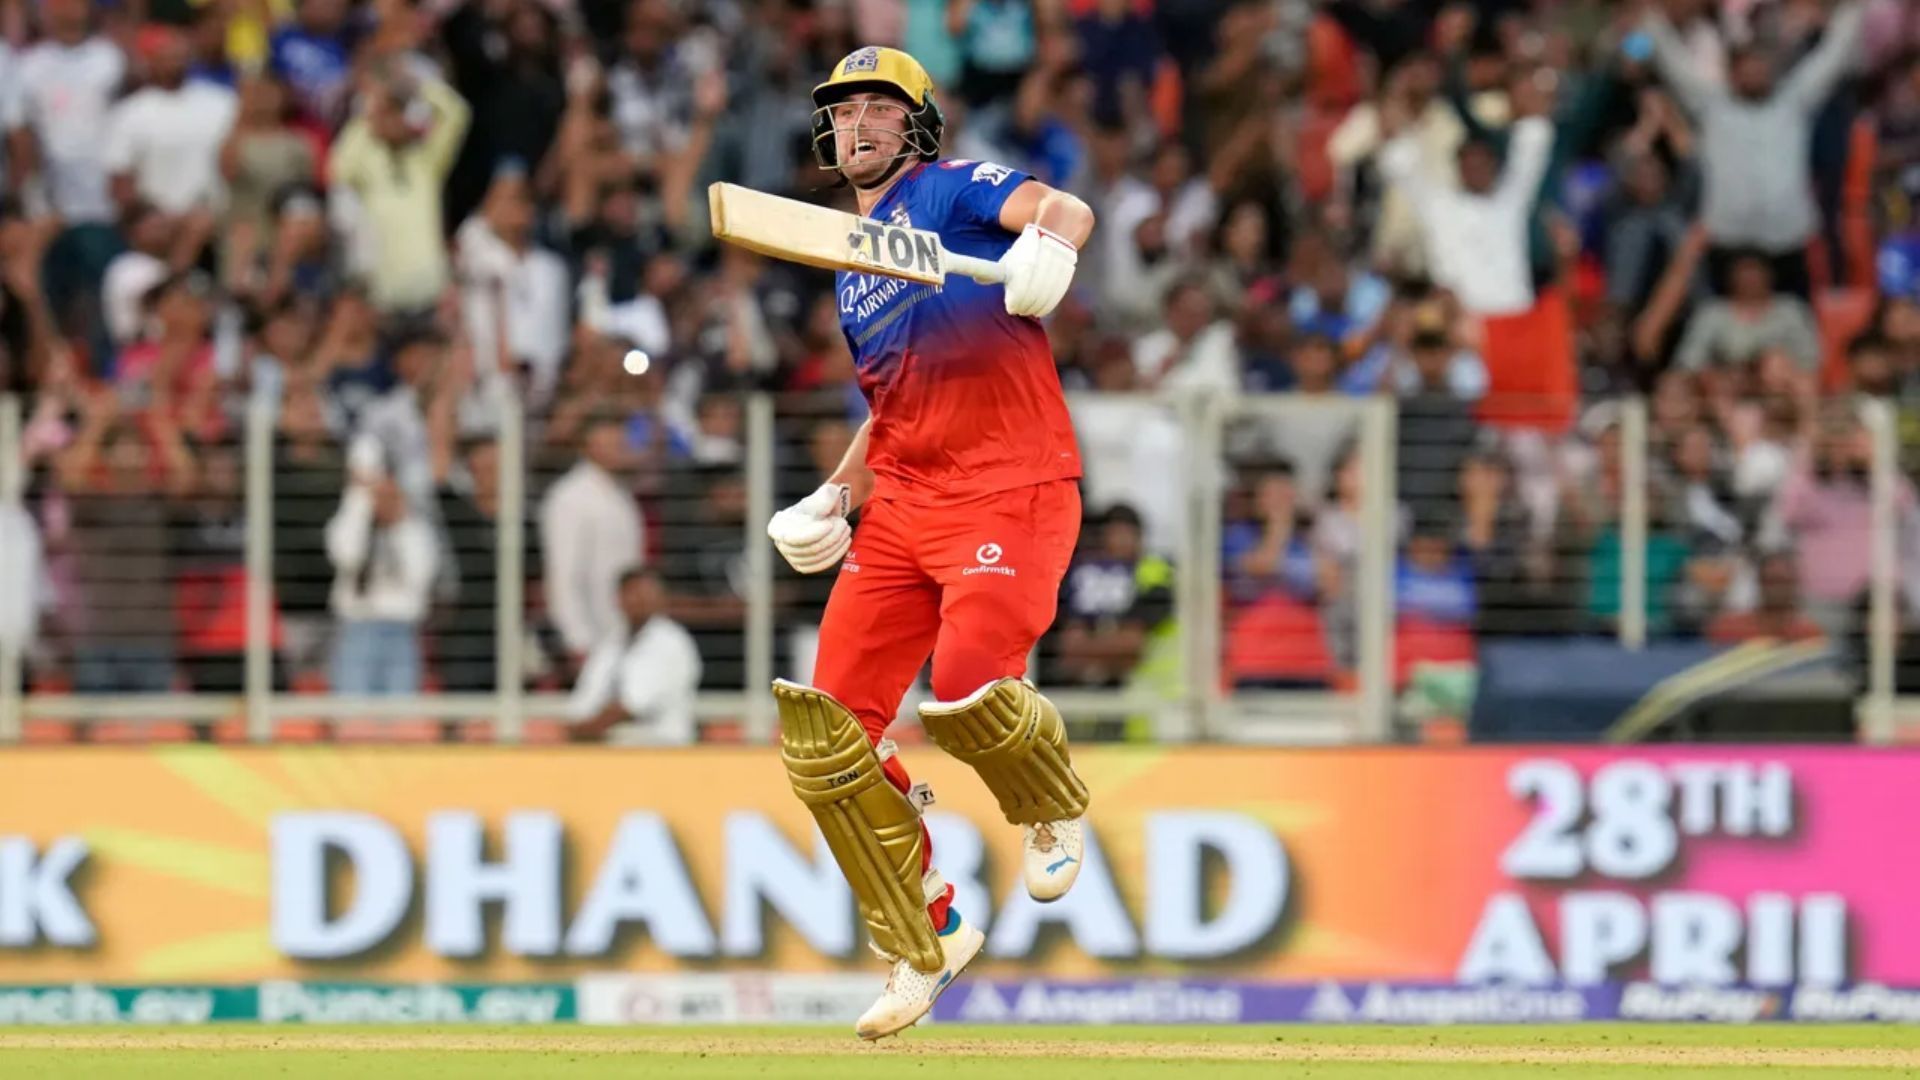 Will Jacks gave RCB consistency at No.3 and also a few overs of handy off-spin